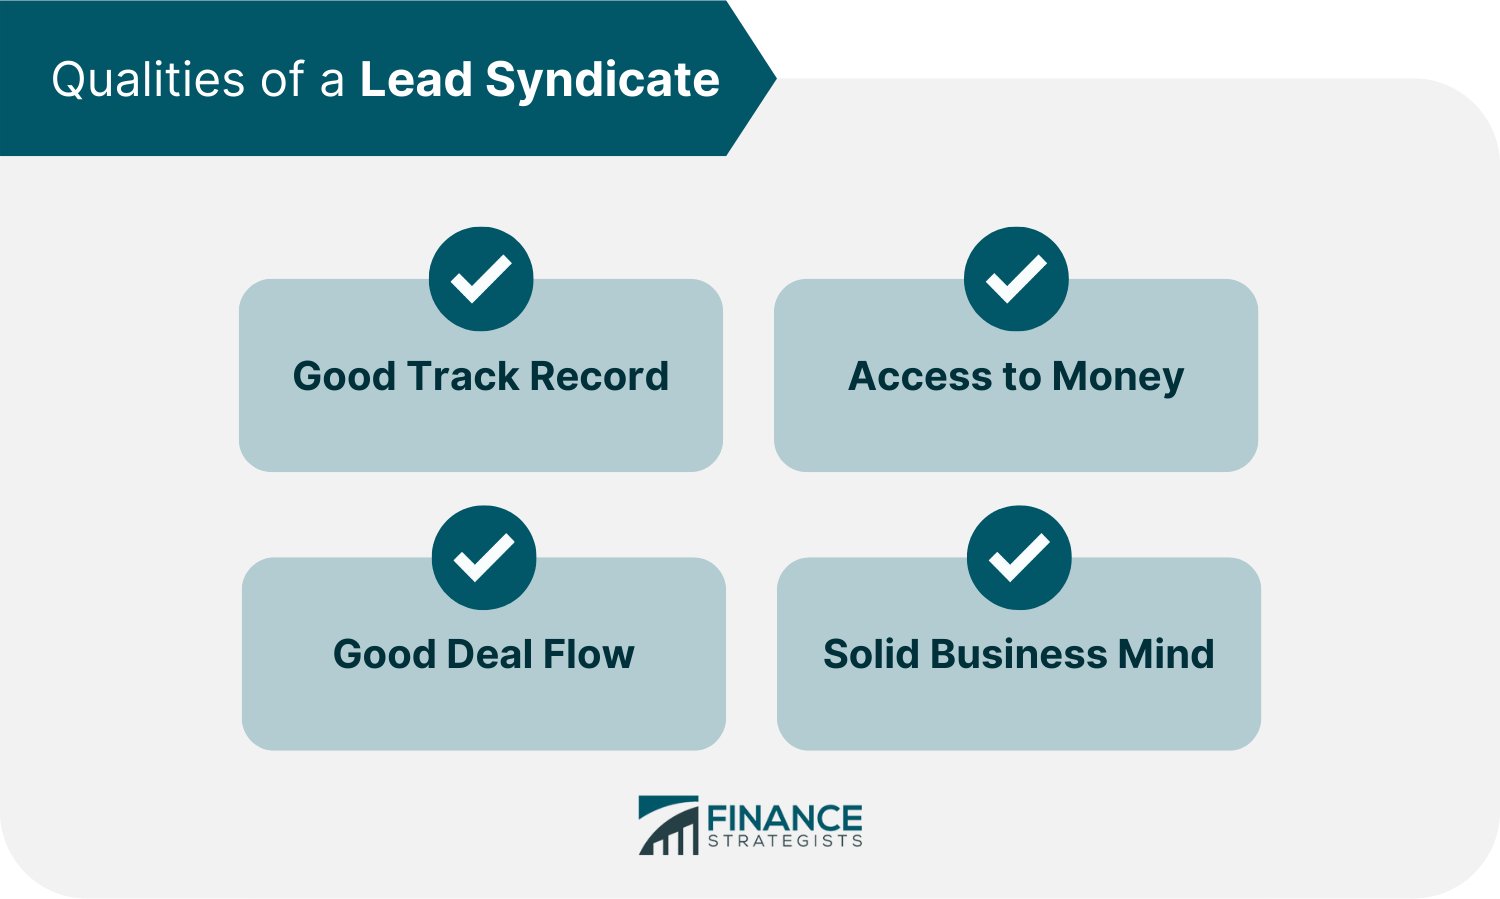 Qualities of a Lead Syndicate